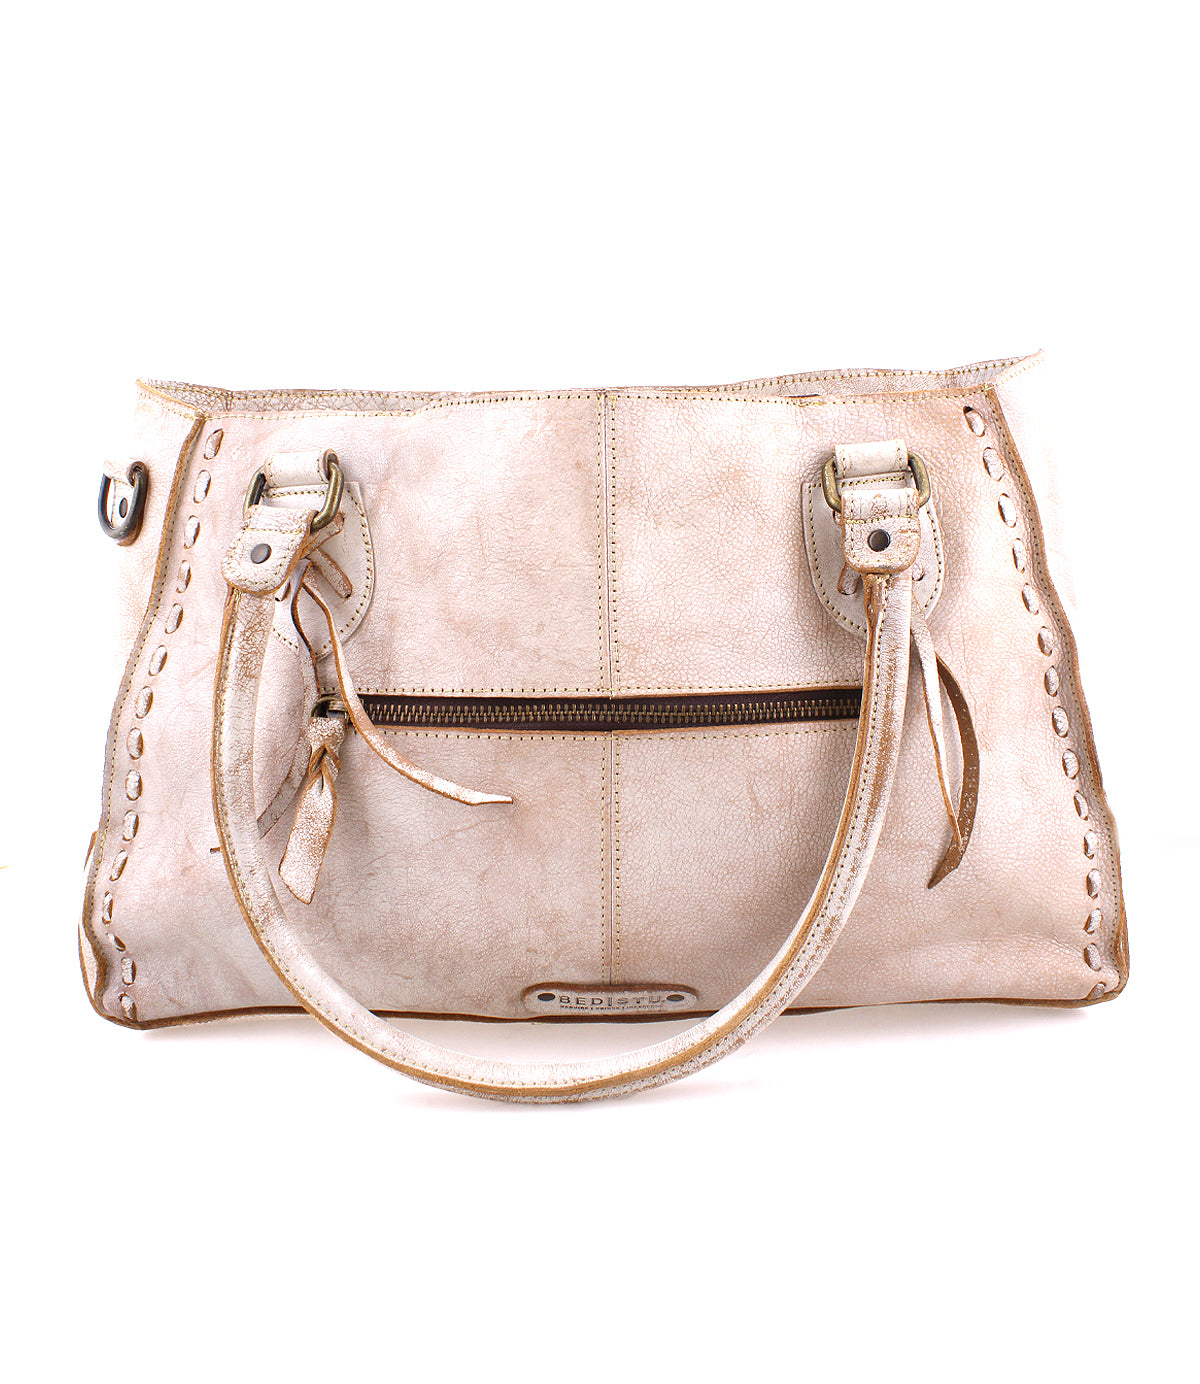 A white Rockababy SL handbag with a Bed Stu upcycled leather handle showcases environmental responsibility.